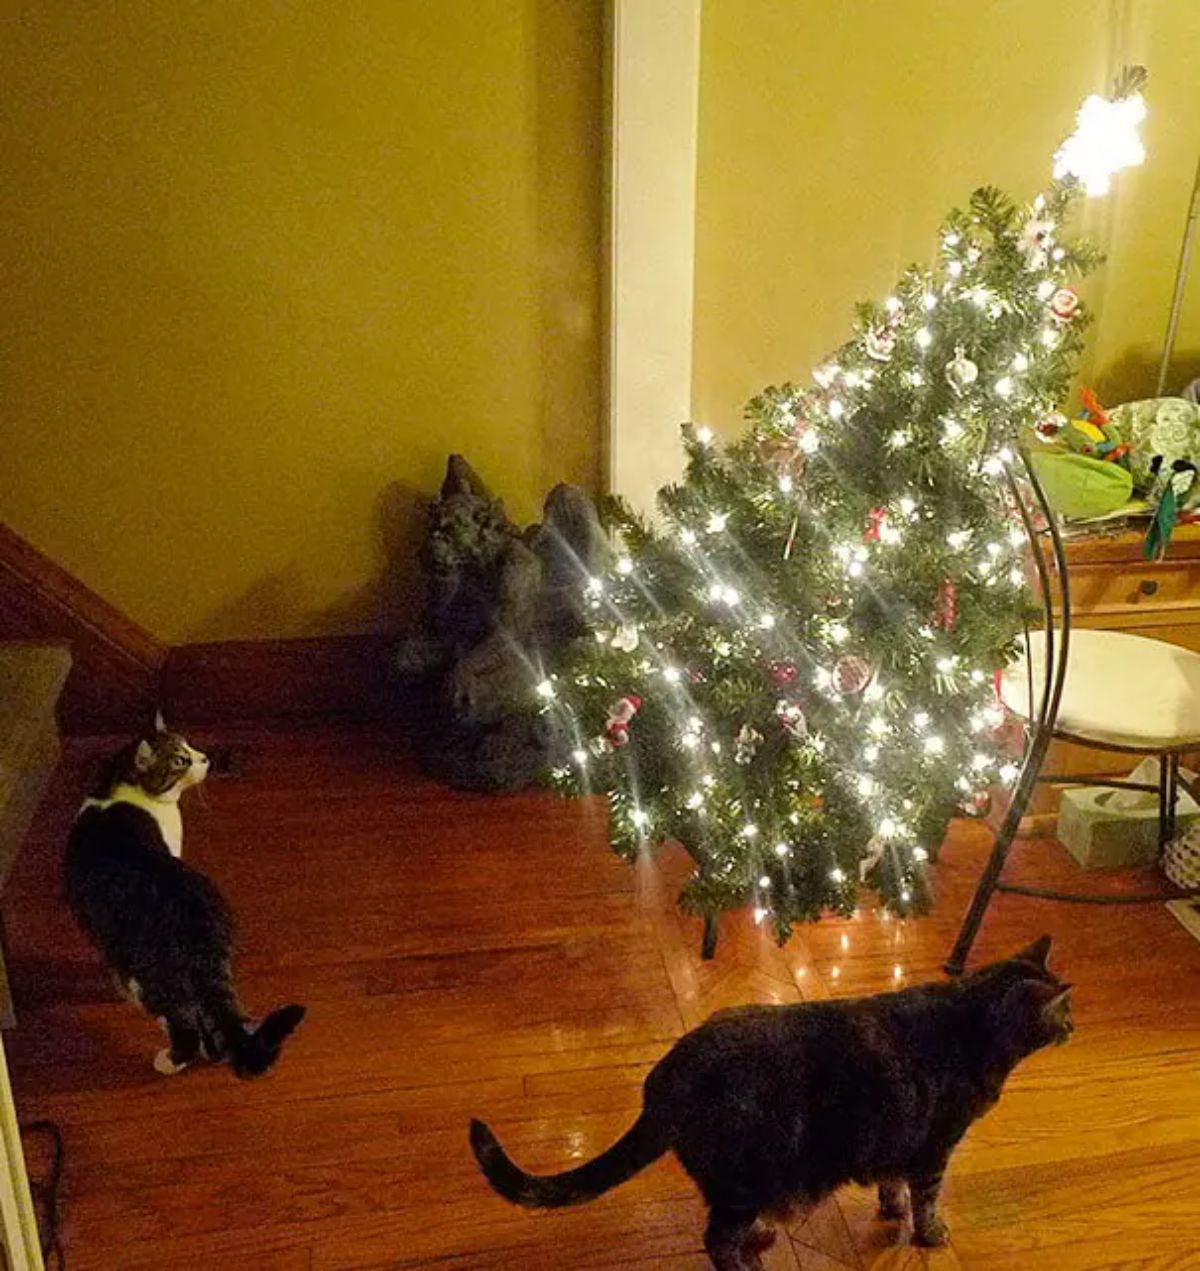 christmas tree toppling over with a black cat and a black and white cat standing nearby